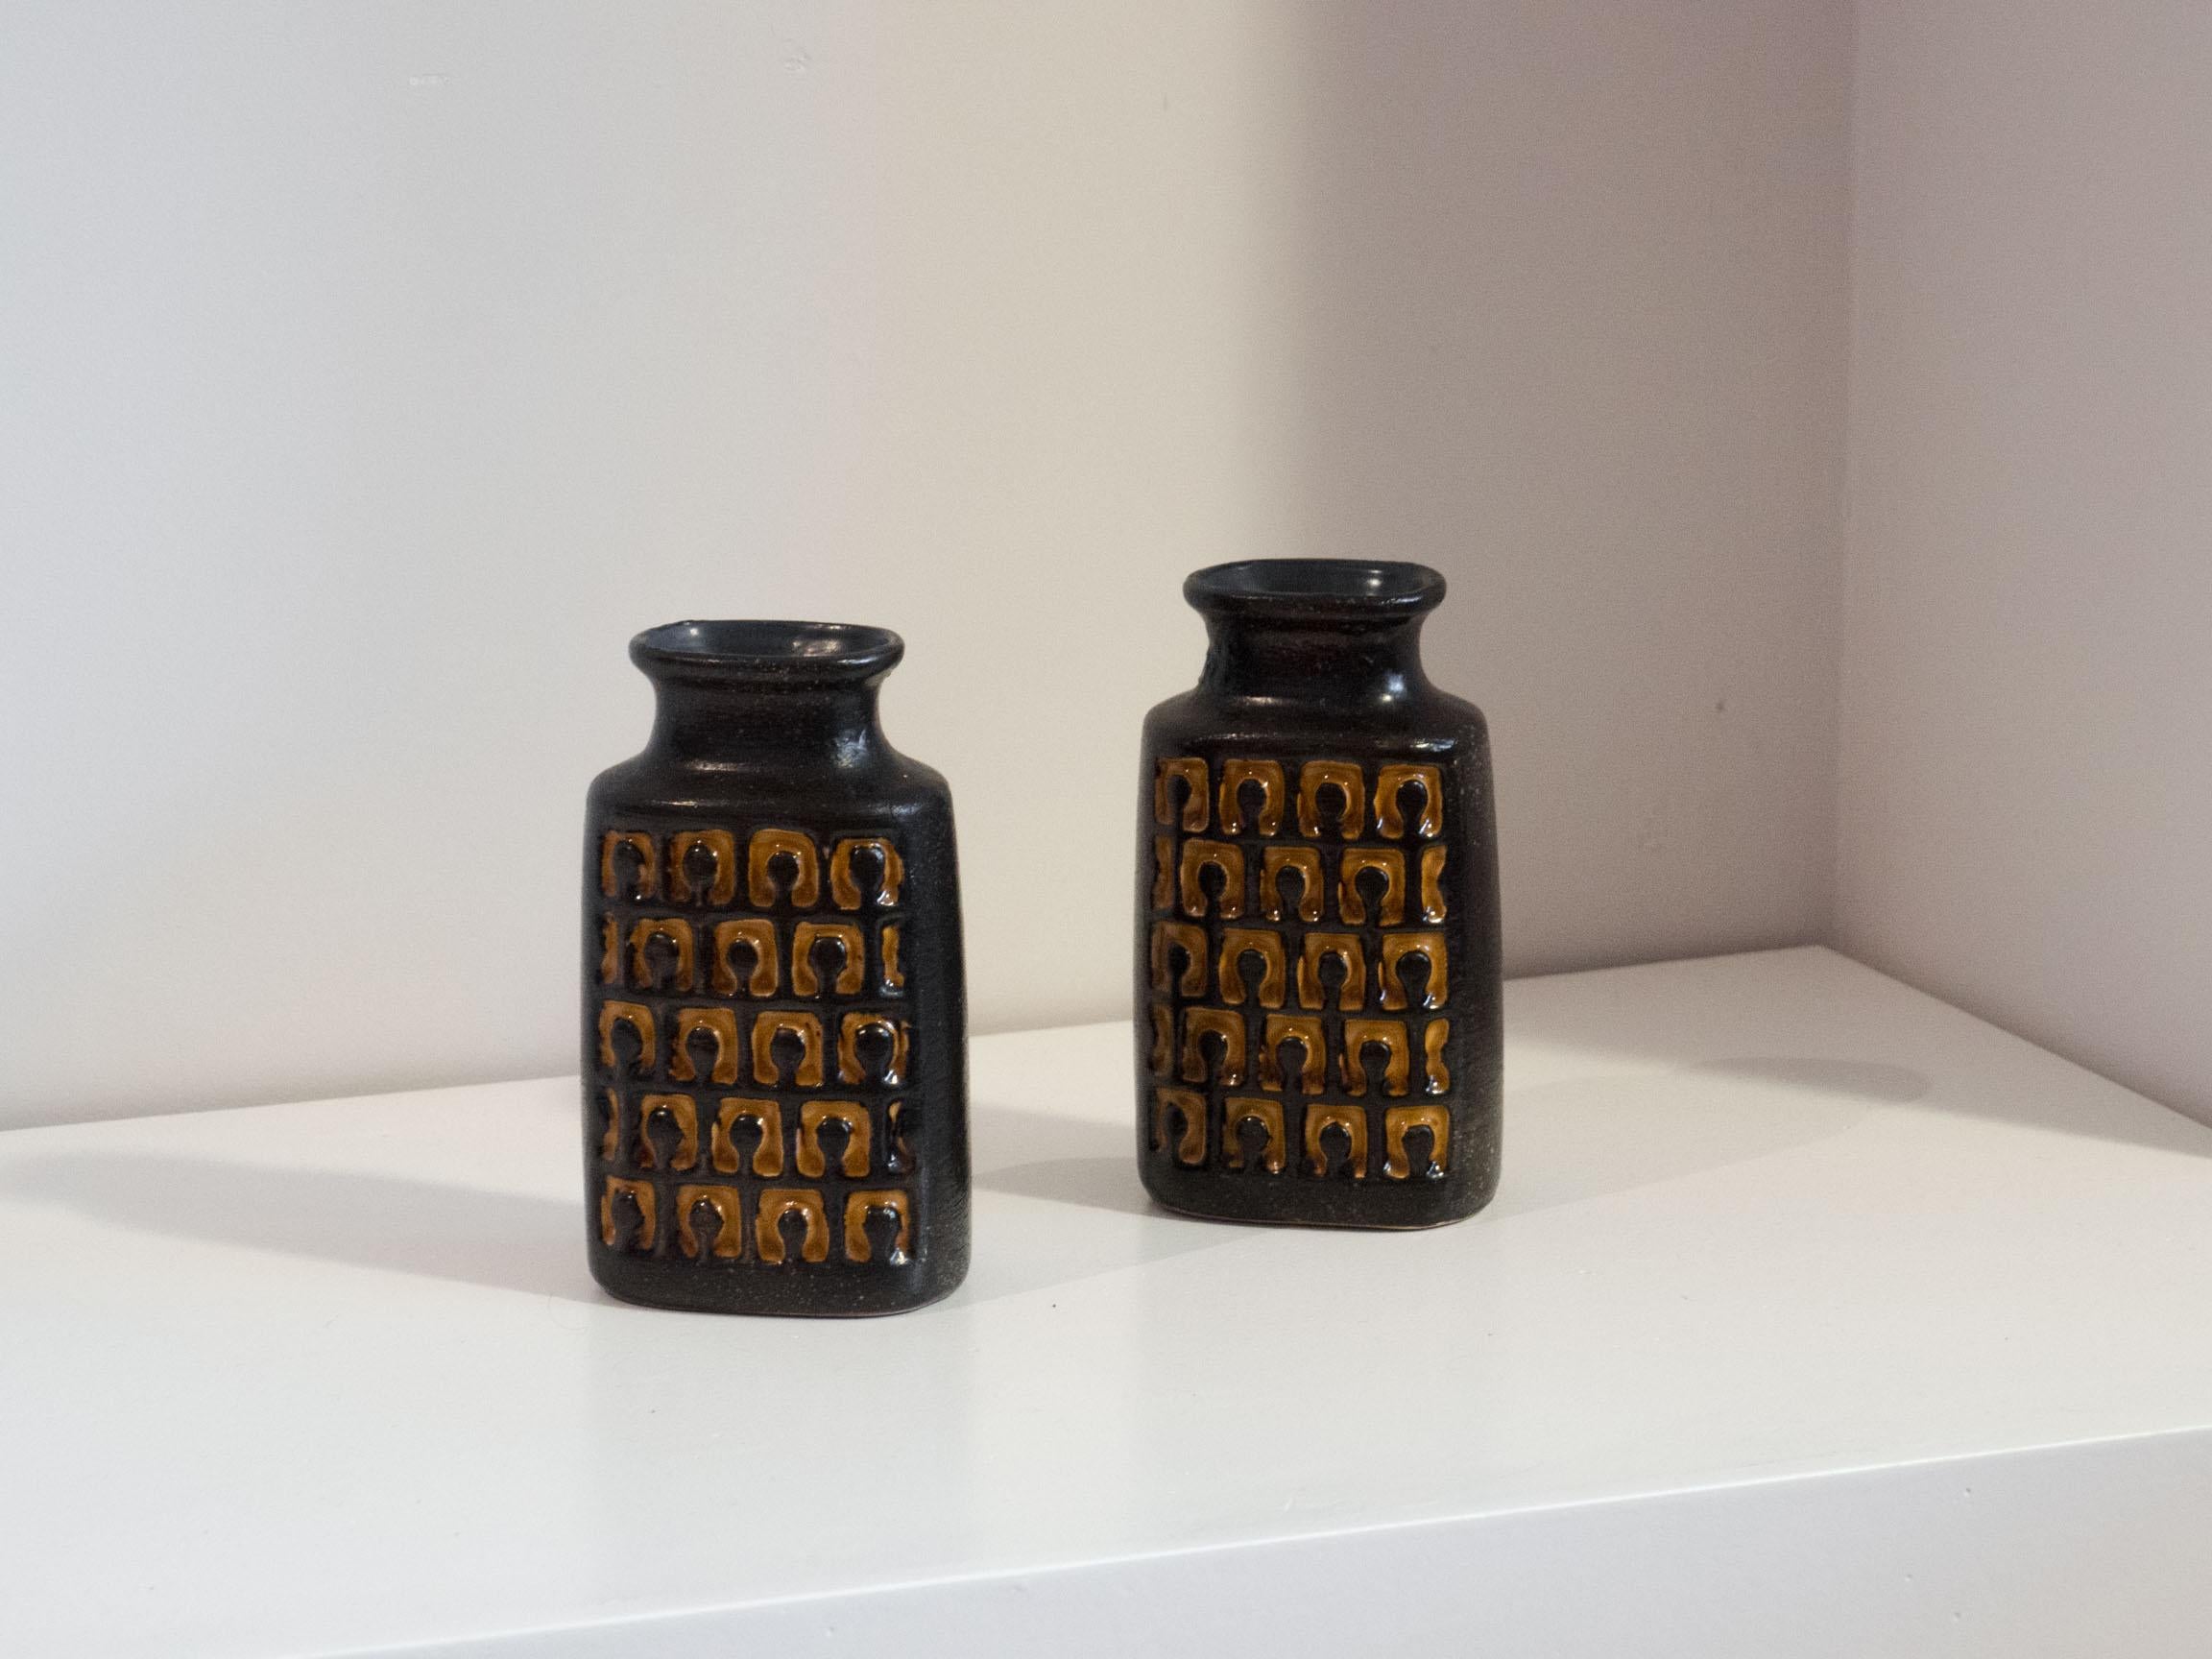 Set of two identical vases from West-Germany, 1960s.

This set of ceramic vases was made by VEB Haldensleben and they have a black and yellow glazing with a very interesting motif on both sides.

The pair is in excellent condition.